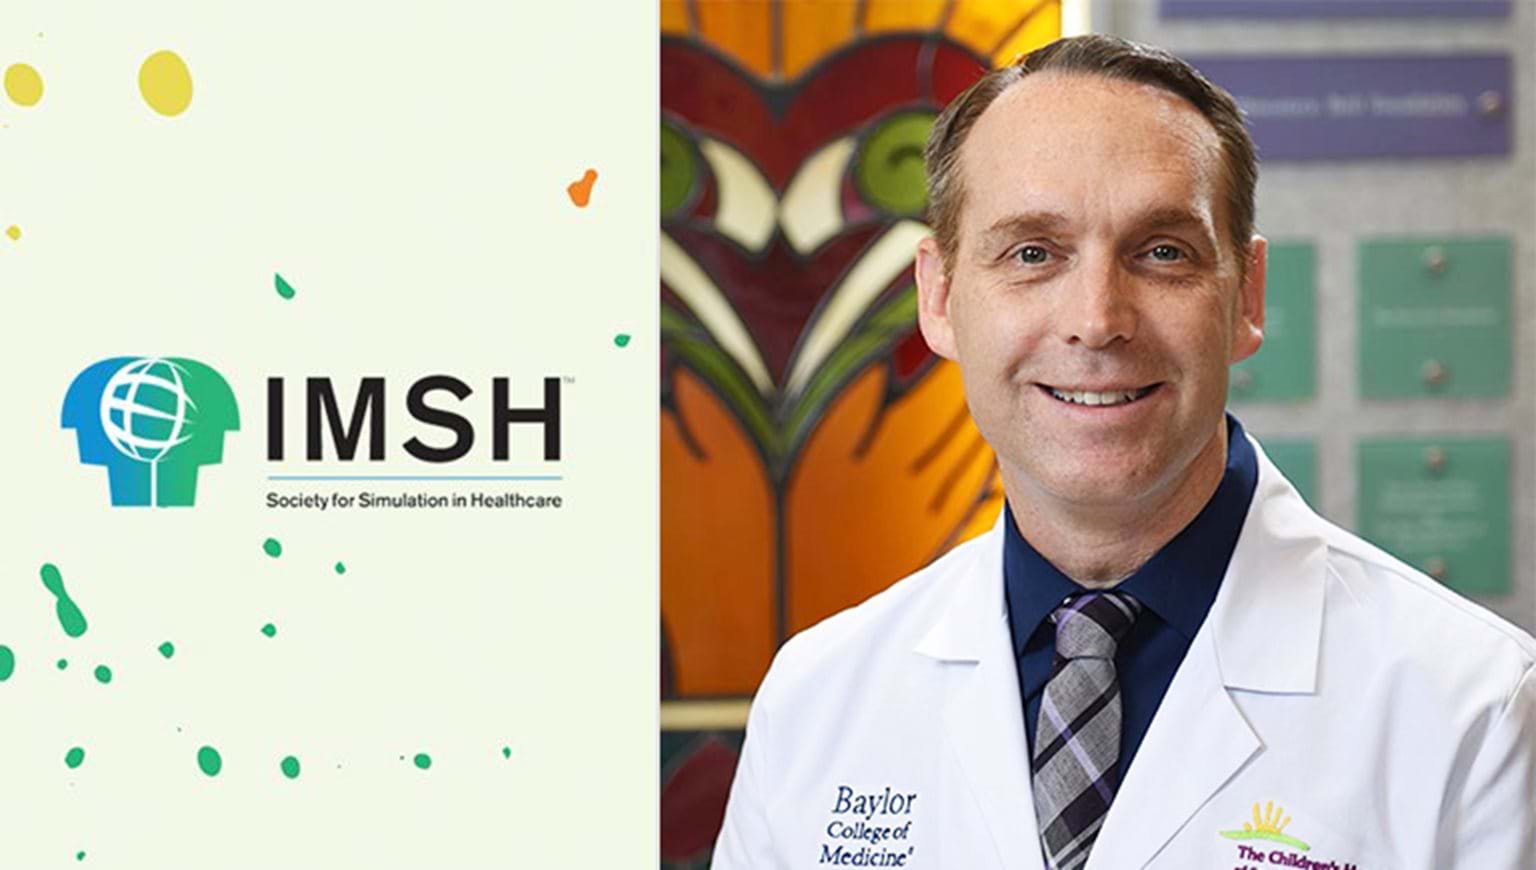 IMSH Learning Lab: Trends in OB Education with Dr. Shad Deering